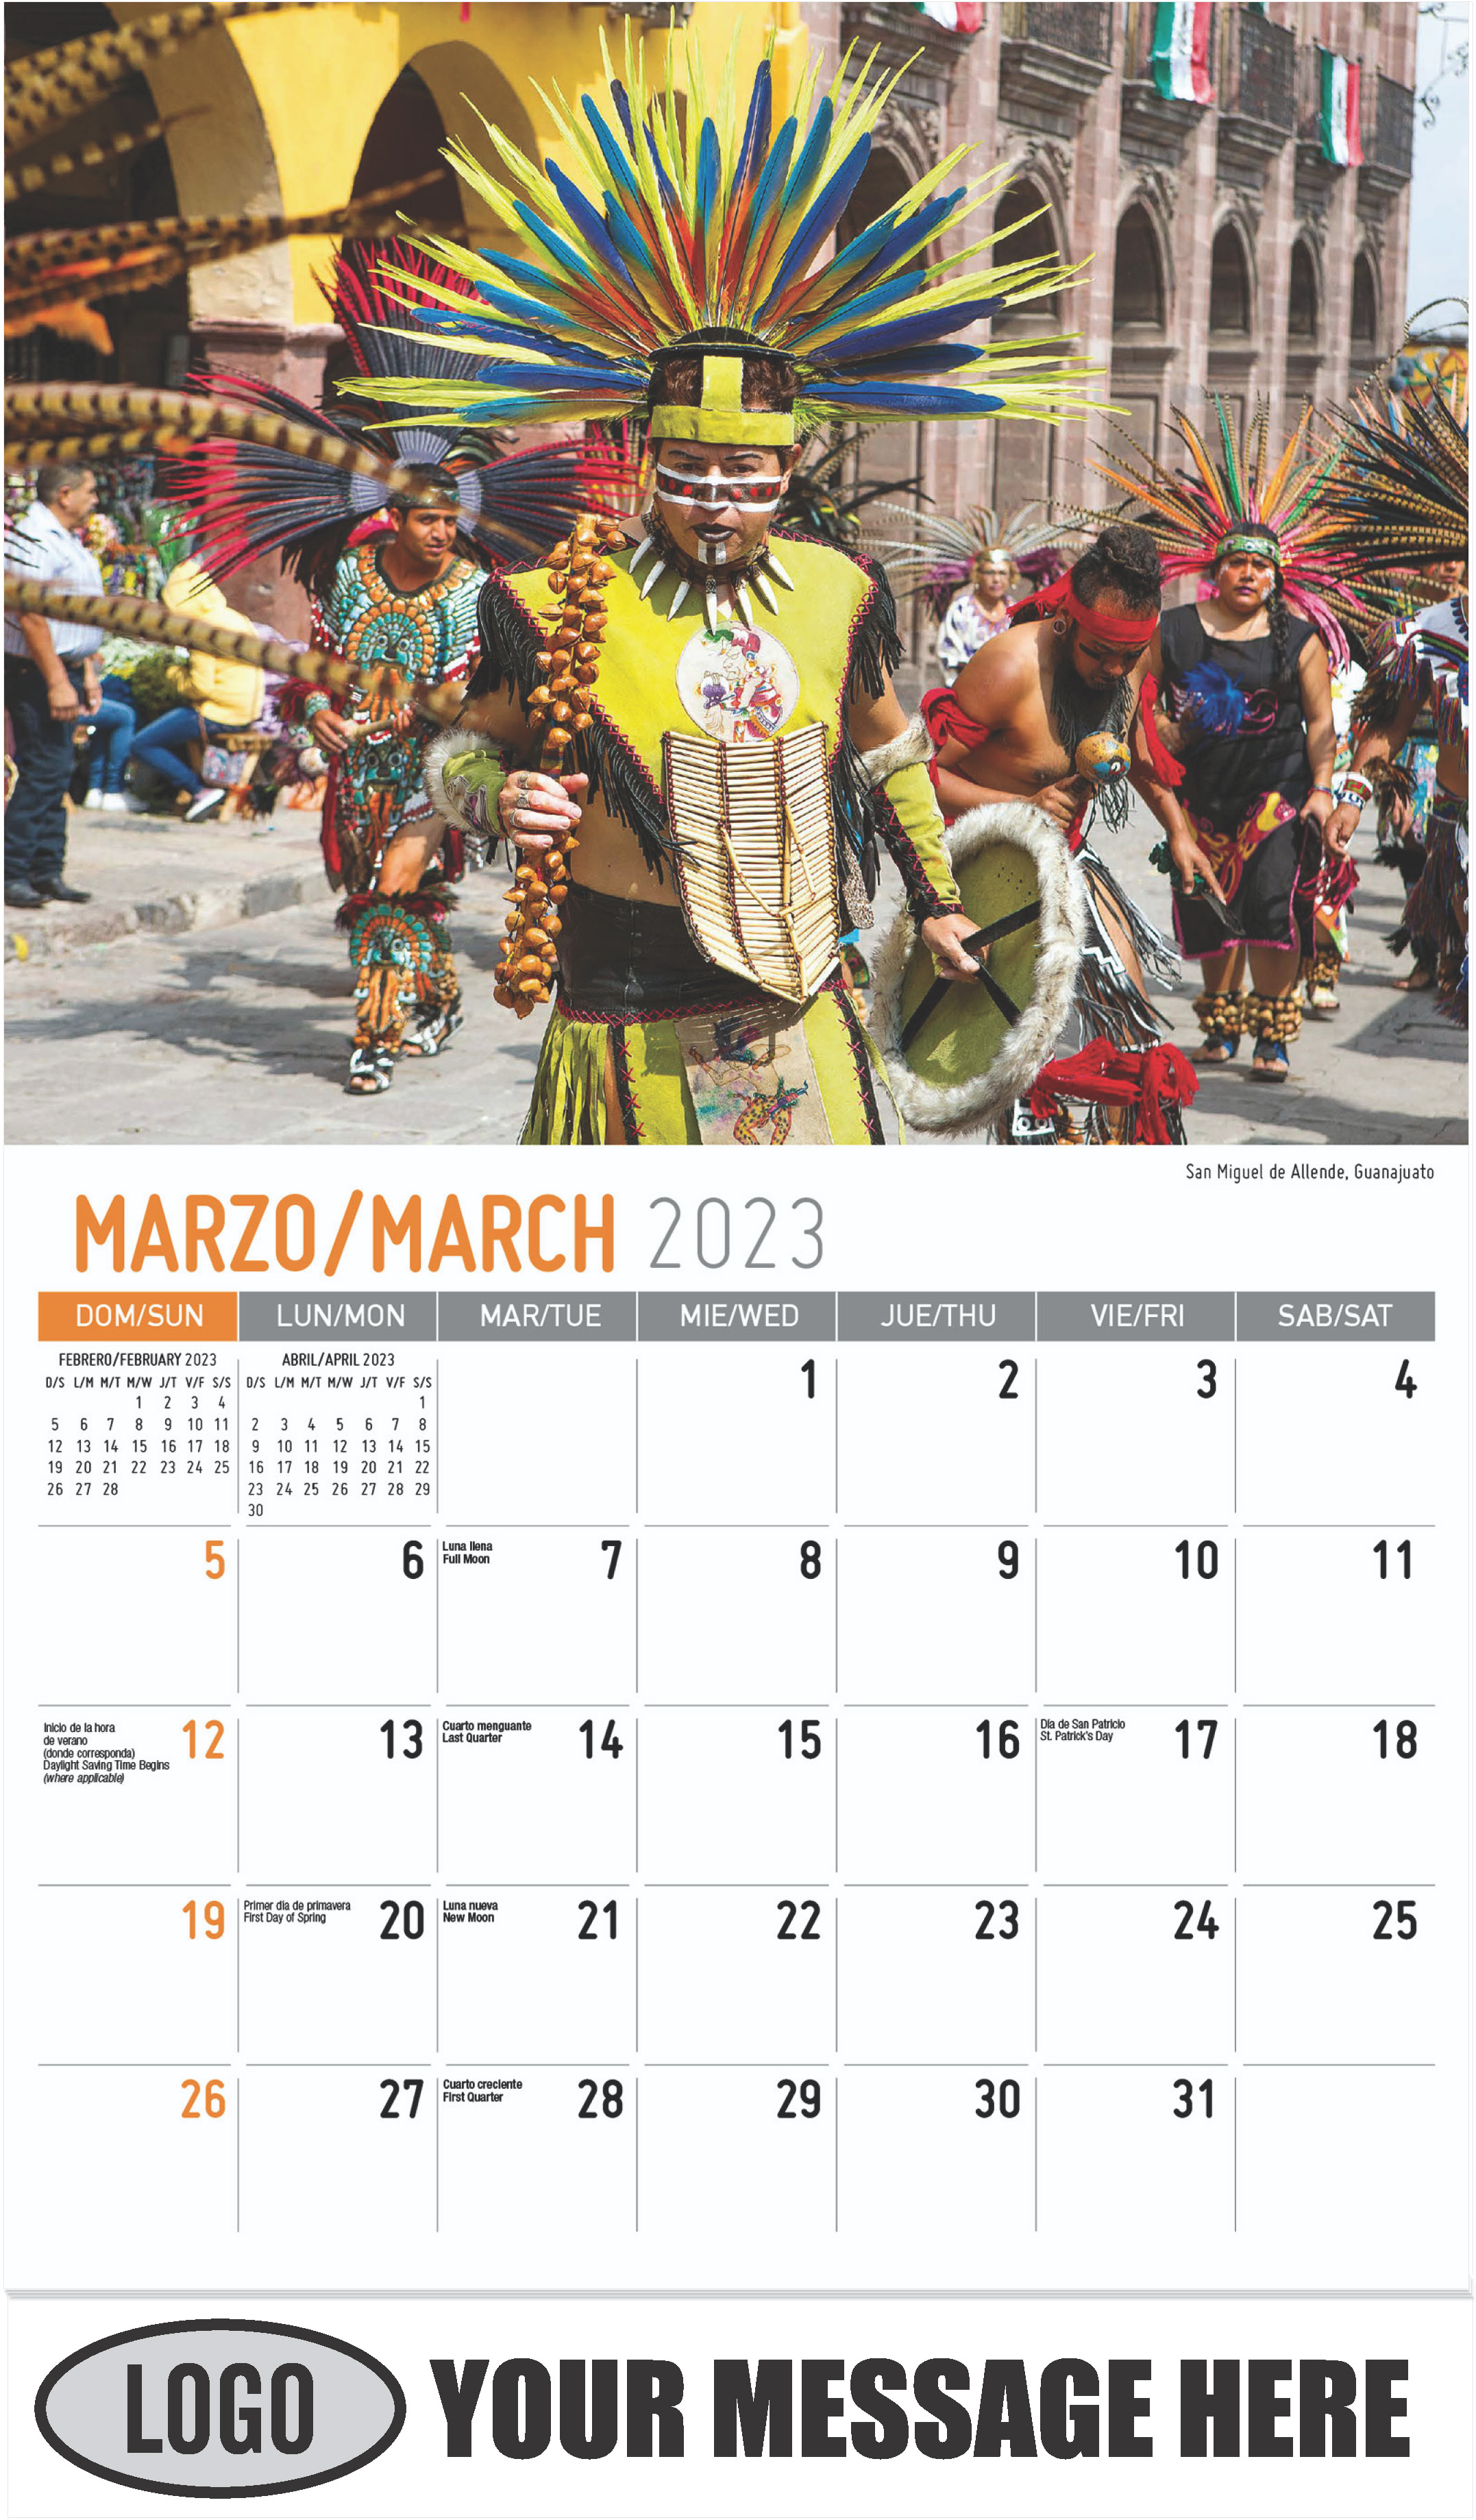 March - Scenes of Mexico (Spanish-English bilingual) 2023 Promotional Calendar